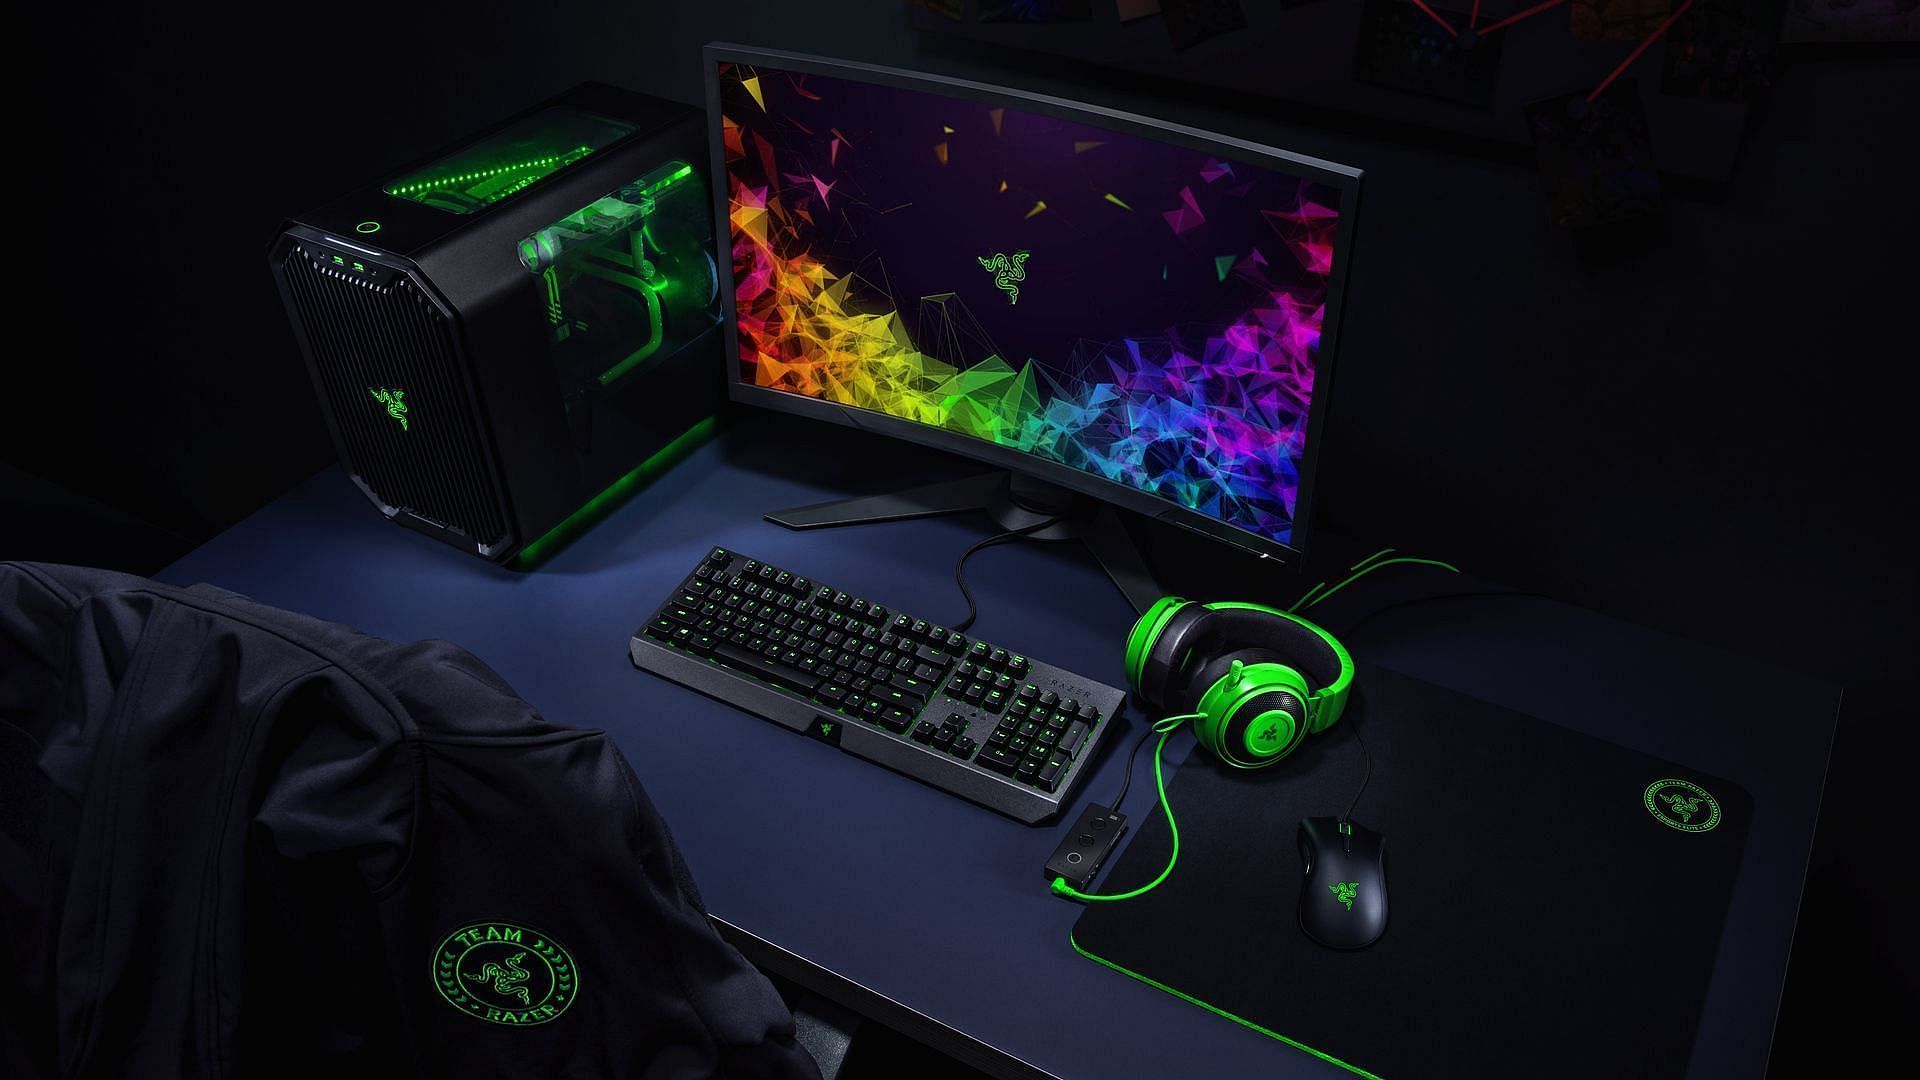 An upgraded gaming PC will be of utmost importance (Image via Razer)